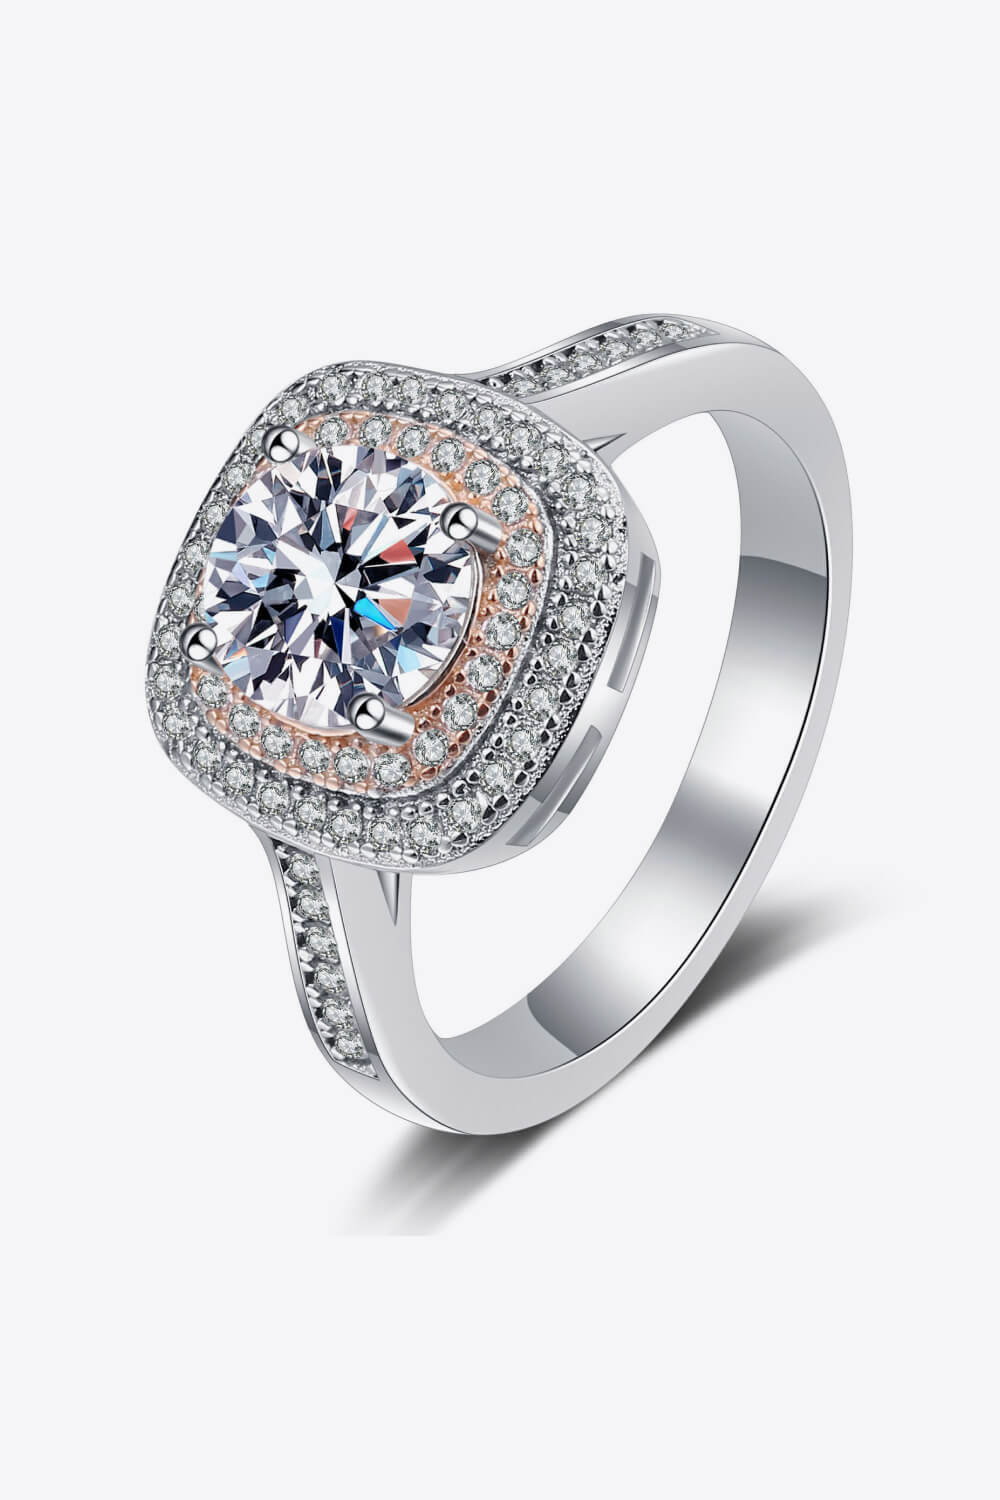 Need You Now Moissanite Ring - BloomBliss.com